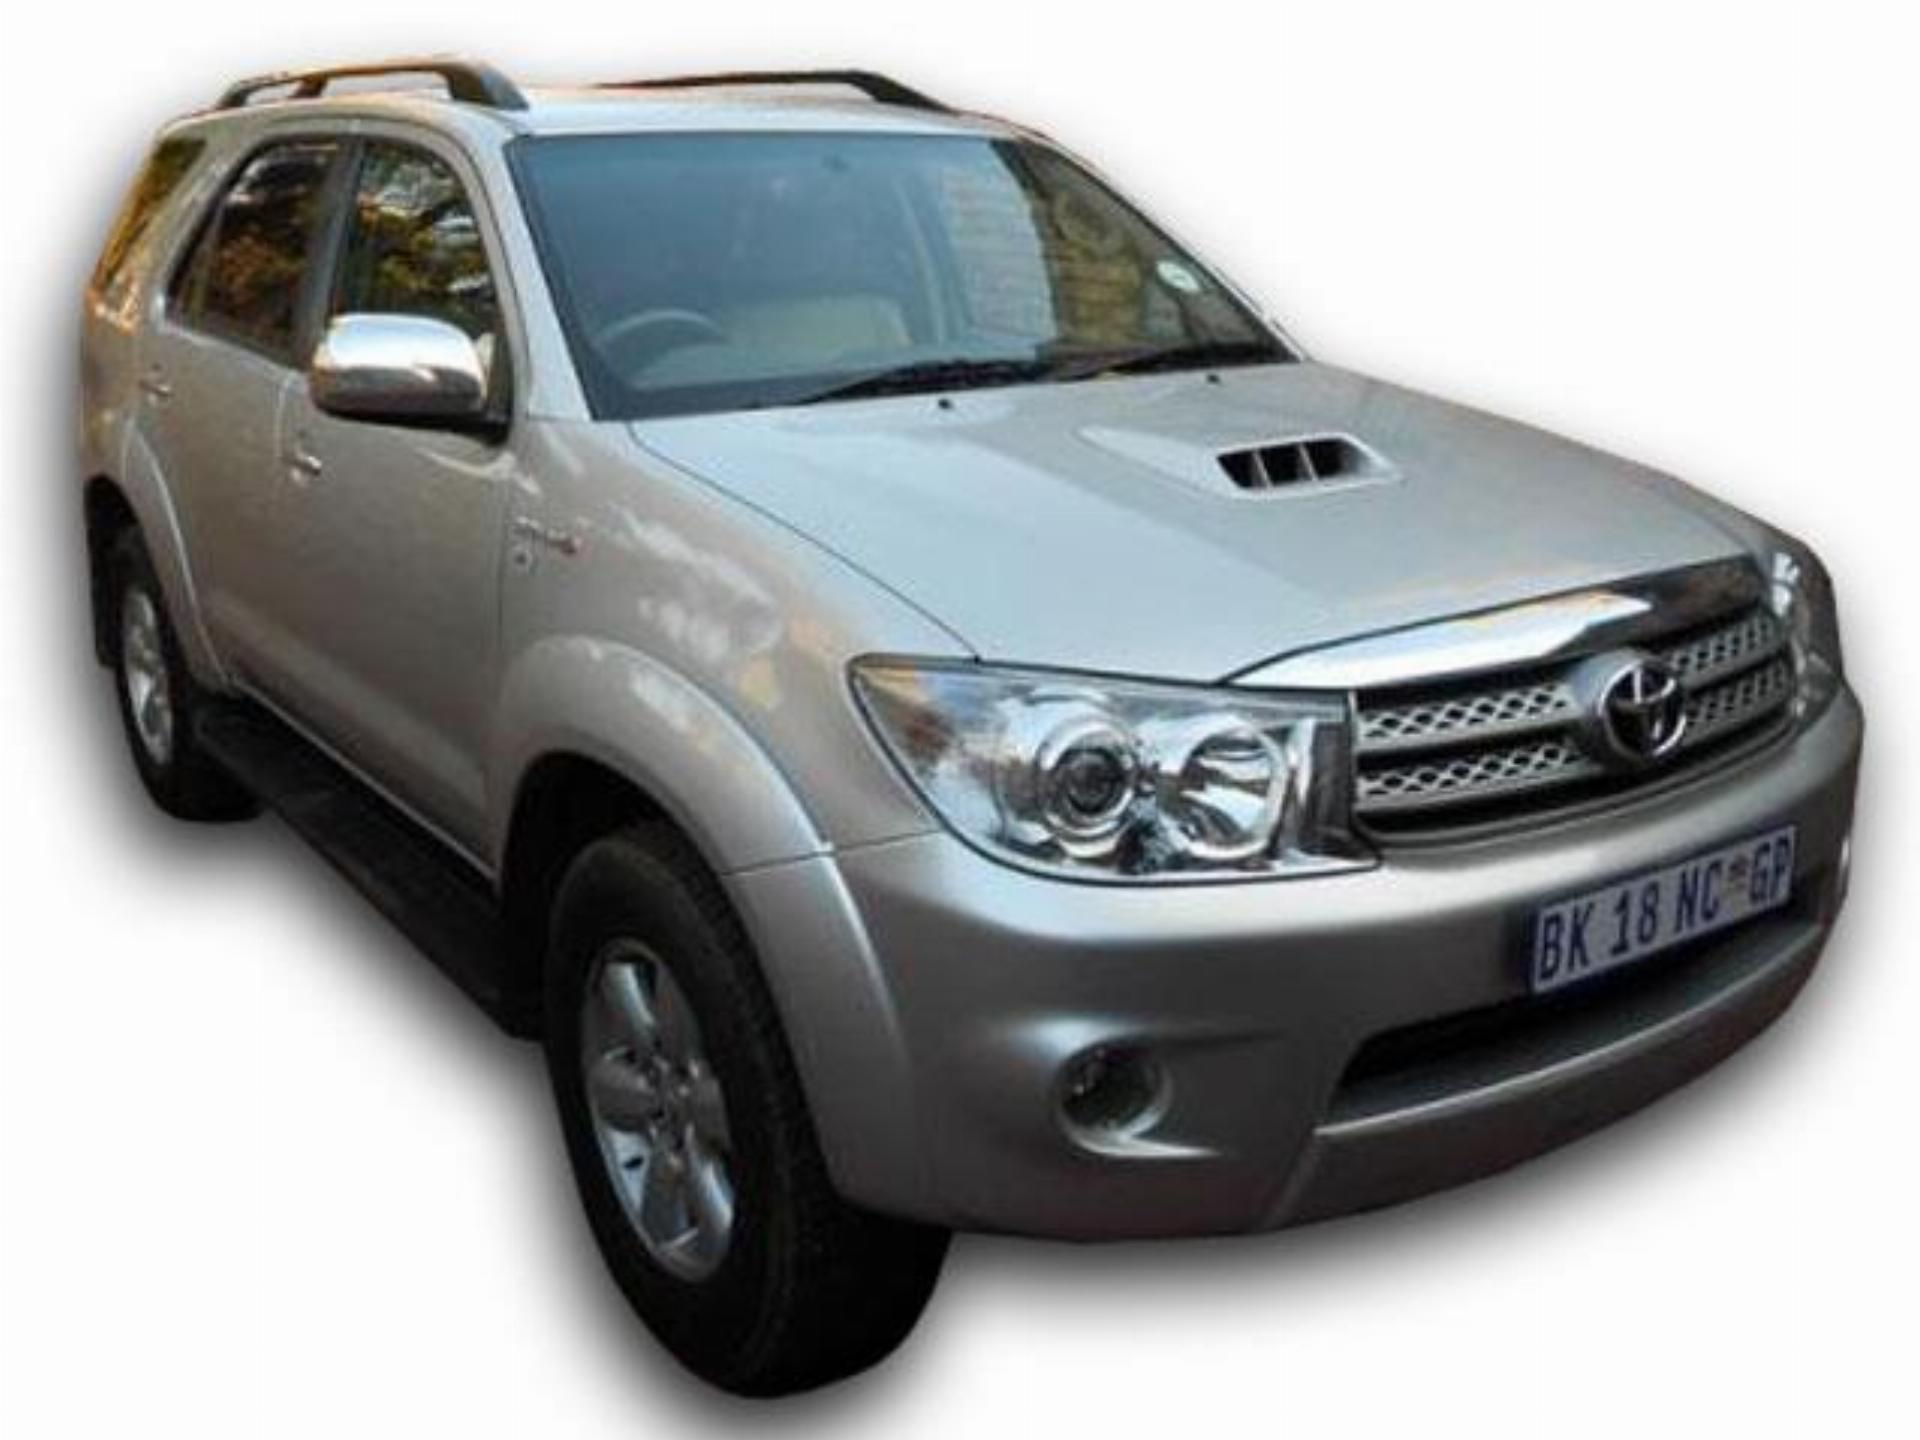 Used Toyota Fortuner 3.0 D4D Auto Silver 2011 on auction - PV1003097